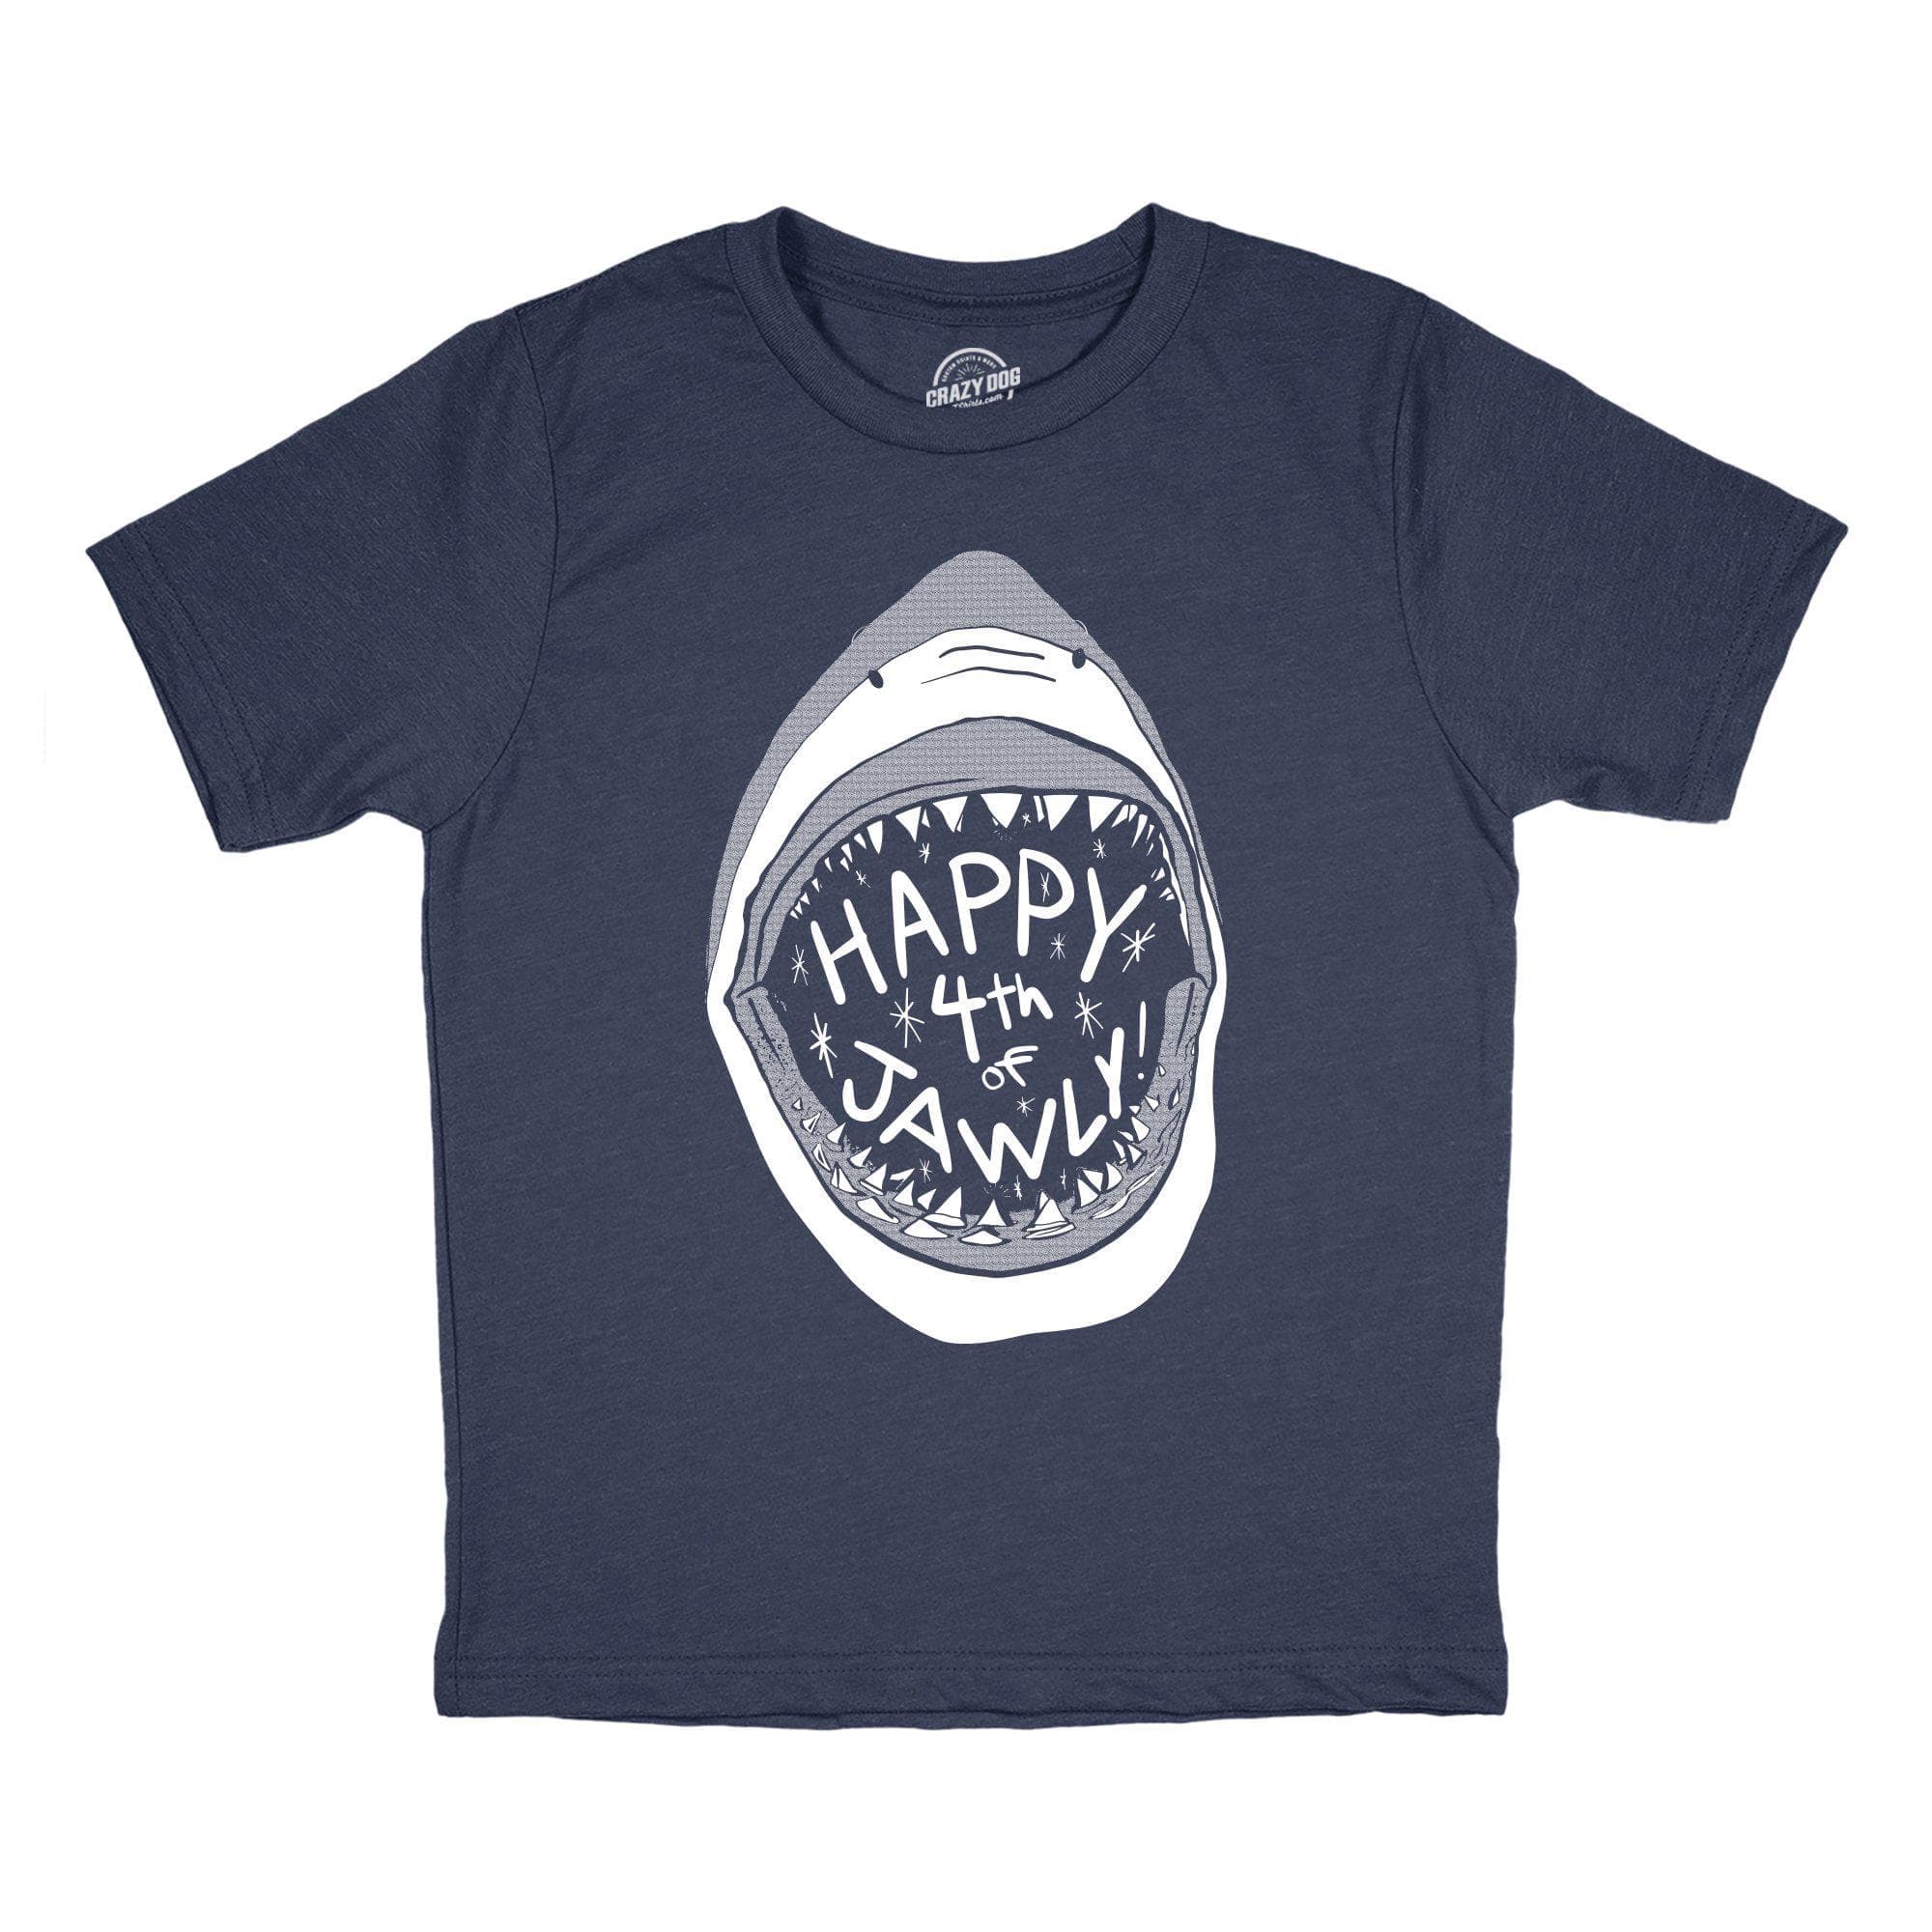 Happy 4th of Jawly Youth Tshirt - Crazy Dog T-Shirts